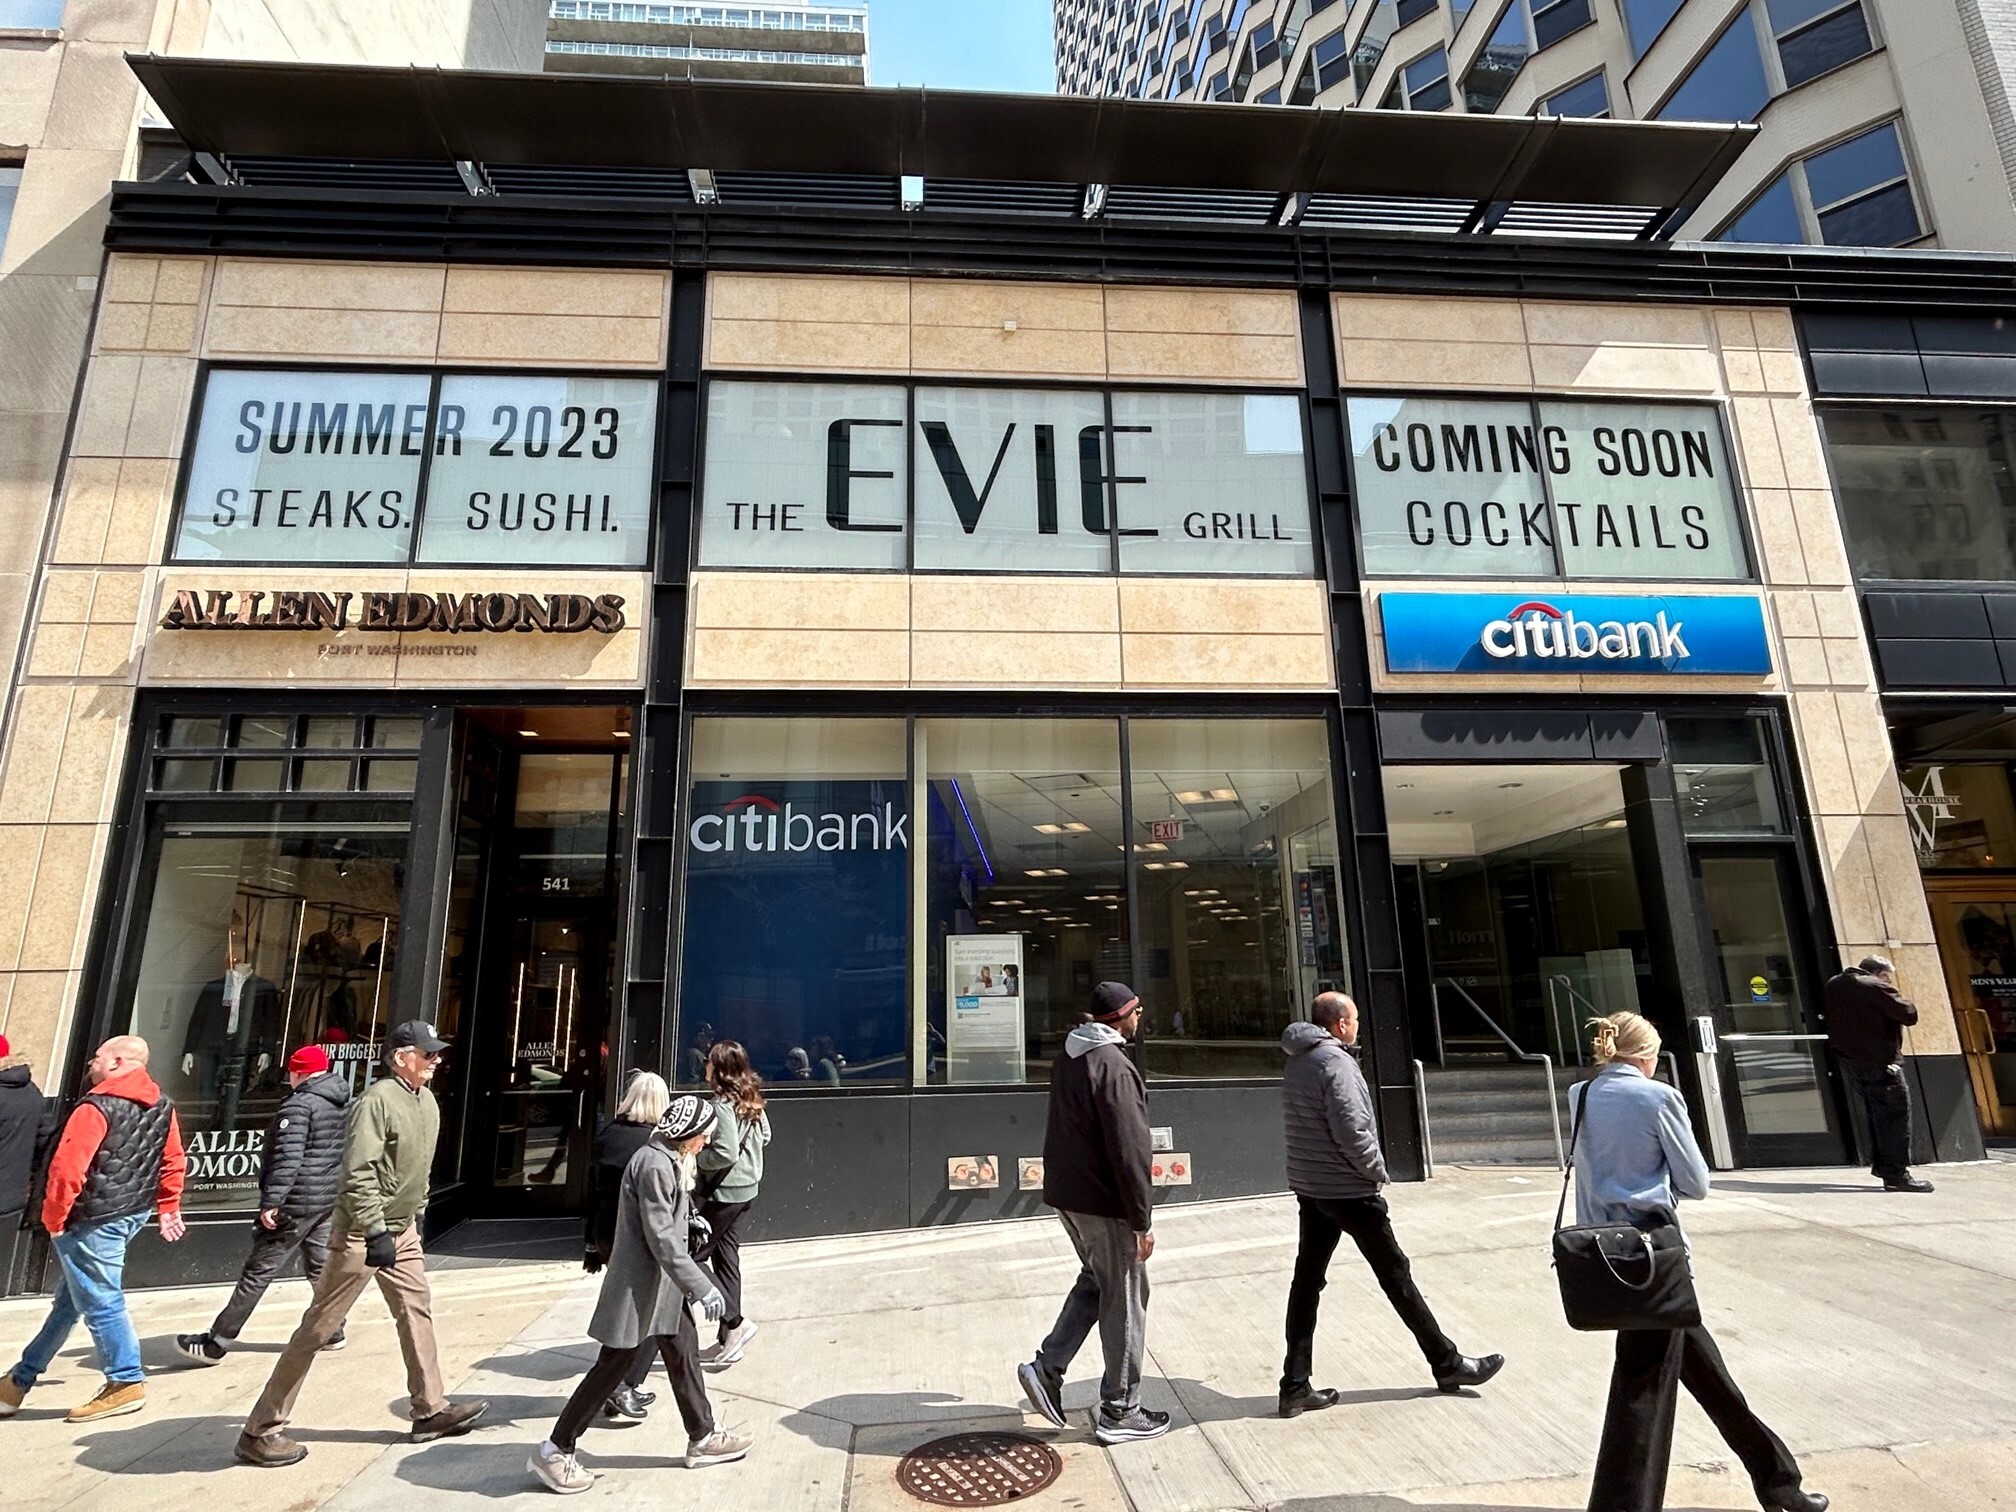 The Evie Grill is a restaurant planned for the former Bandera space at 535 N. Michigan Ave. in Chicago. It is expected to open in June. (Ryan Ori/CoStar)